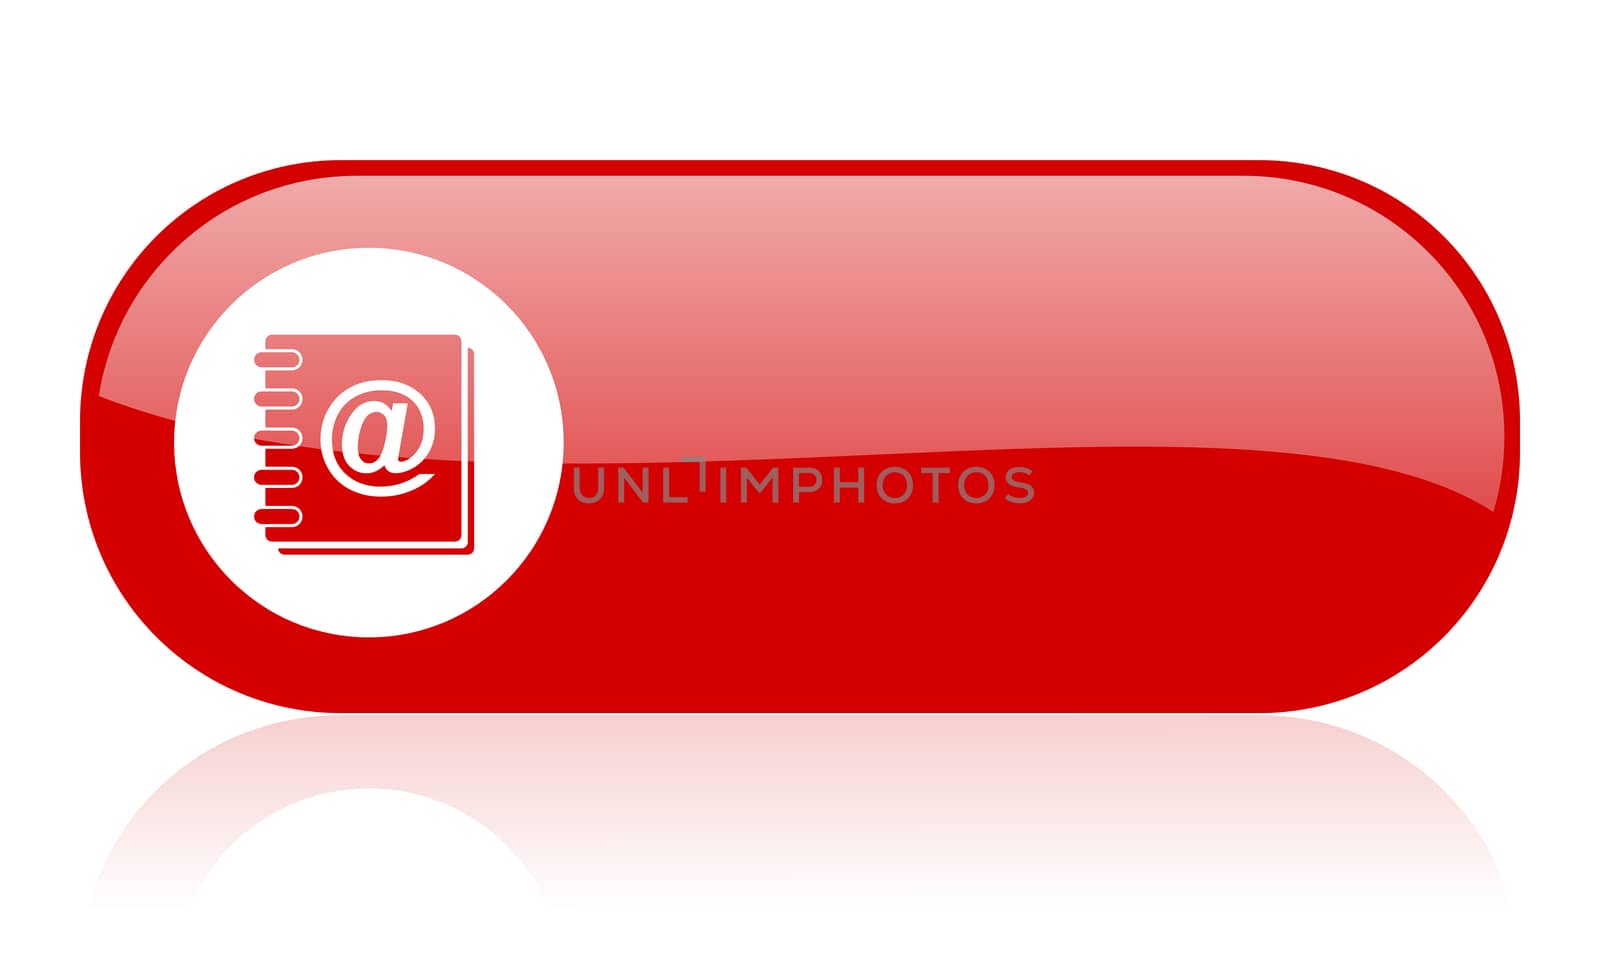 address book red web glossy icon